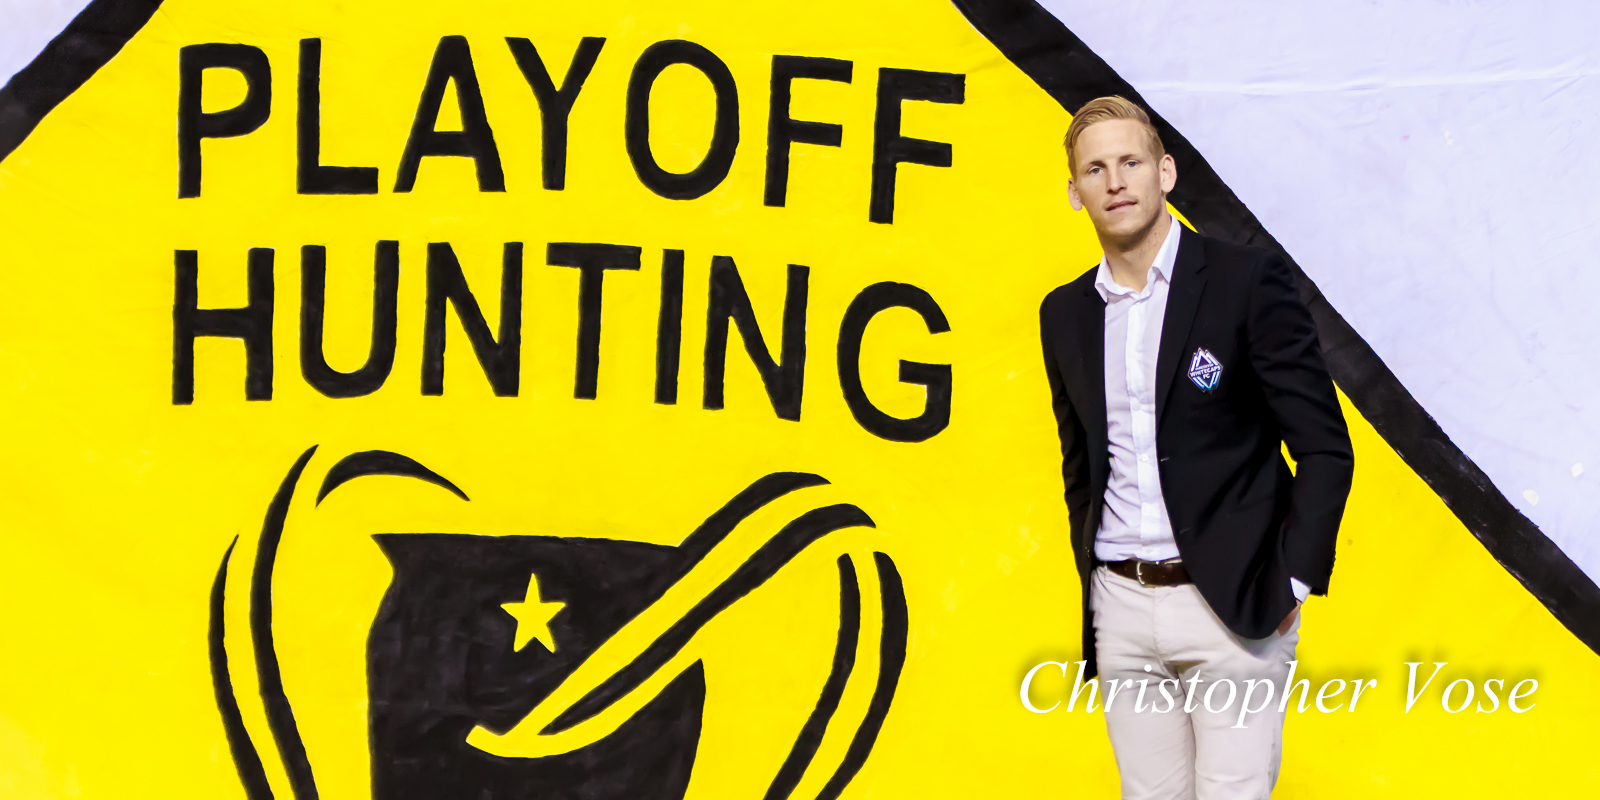 2014-10-25 Playoff Hunting David Ousted.jpg